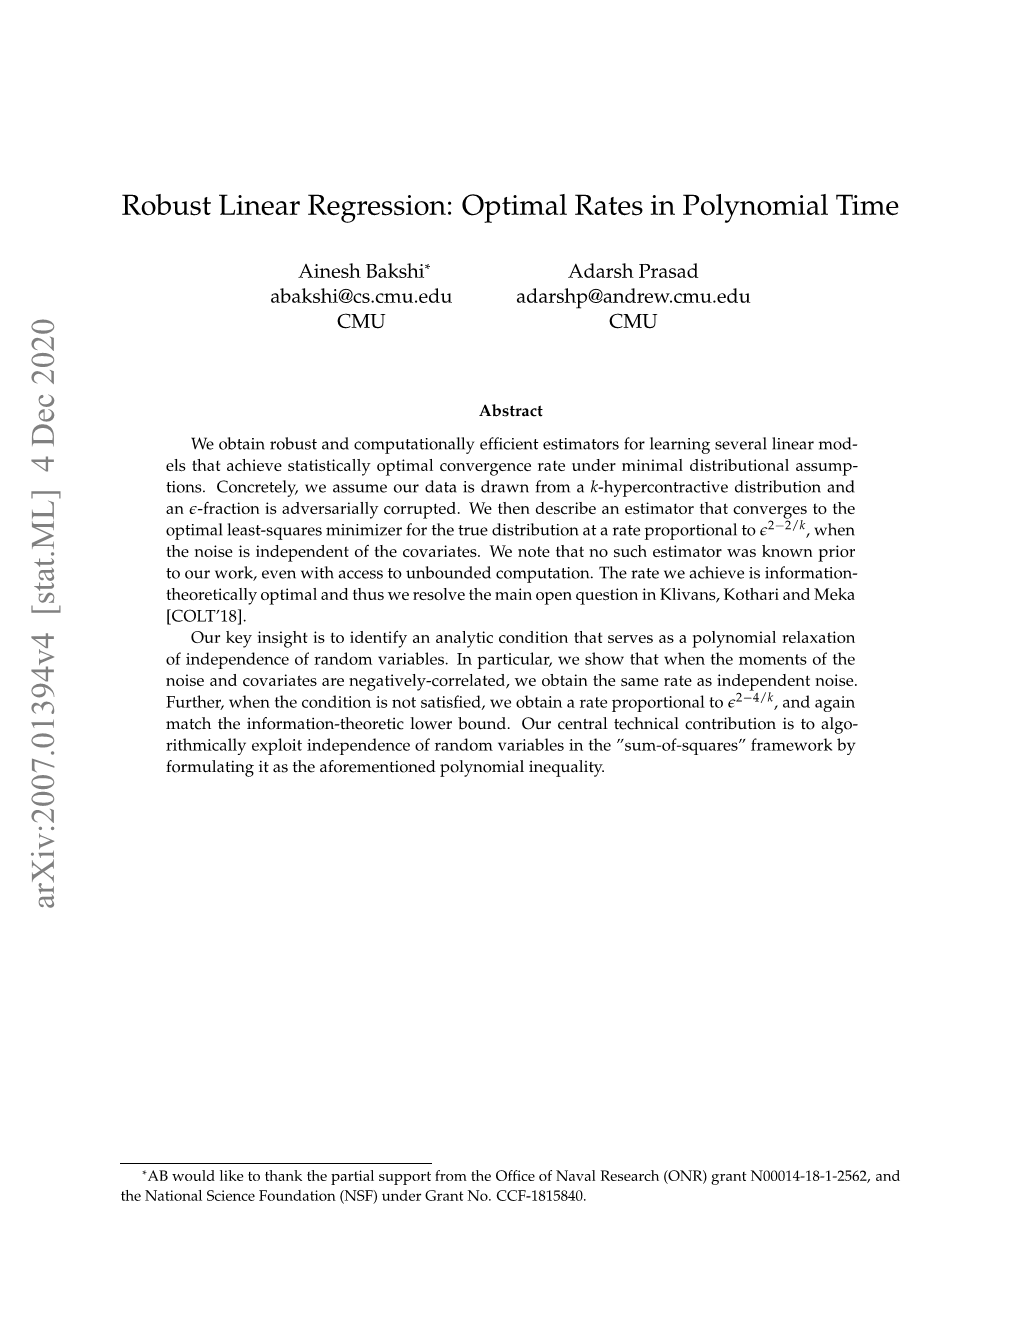 Robust Linear Regression: Optimal Rates in Polynomial Time